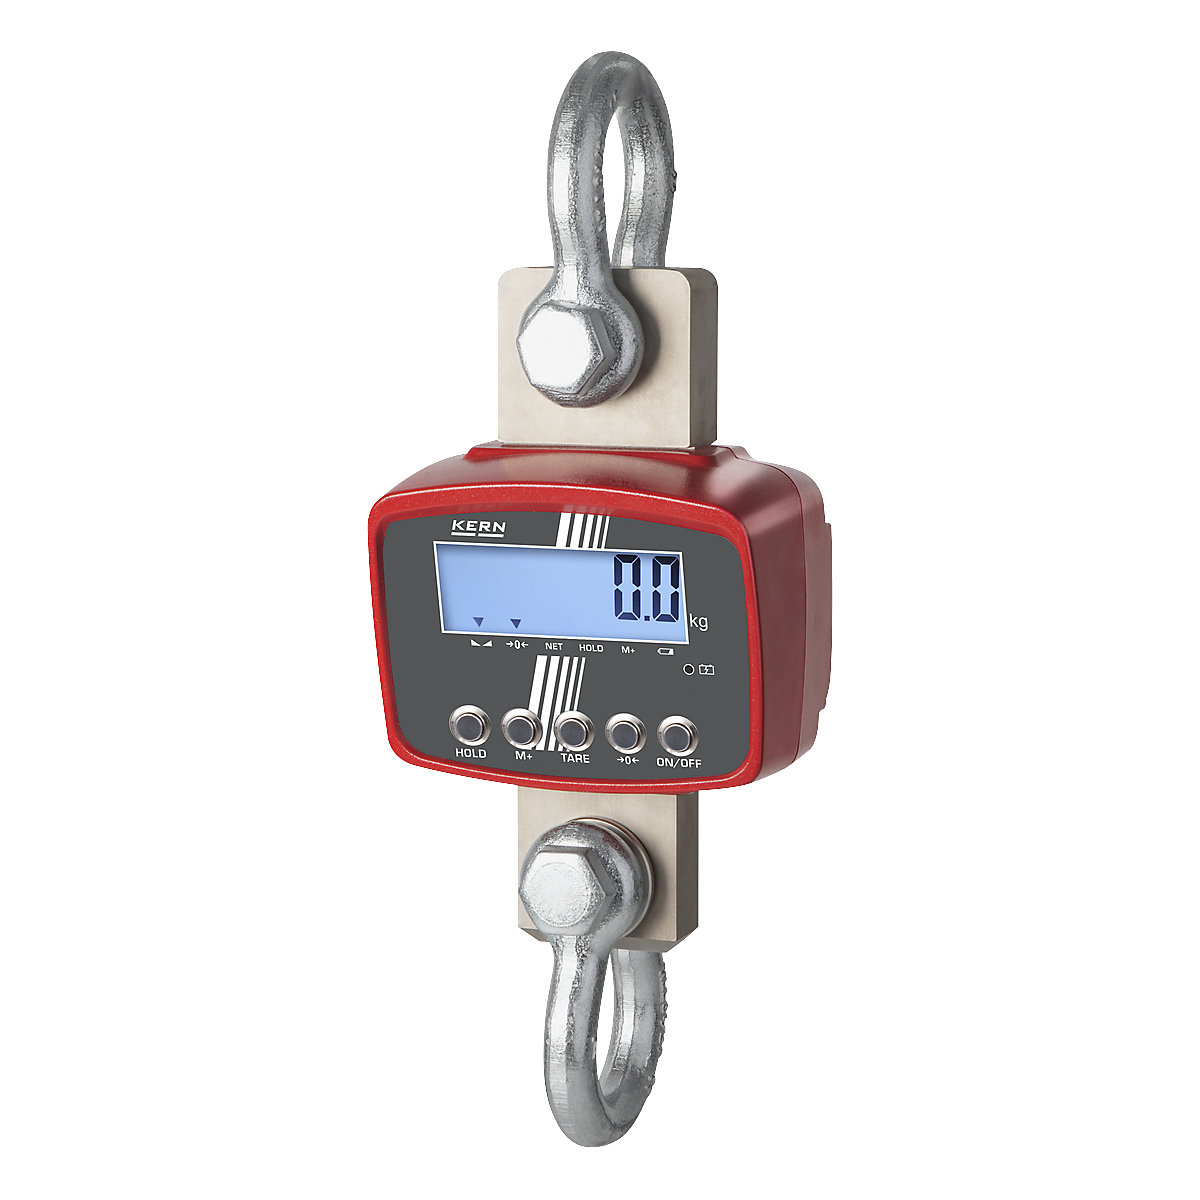 Crane scales – KERN, high resolution, weighing range up to 1500 kg, read-out accuracy 100 / 200 / 500 g-2